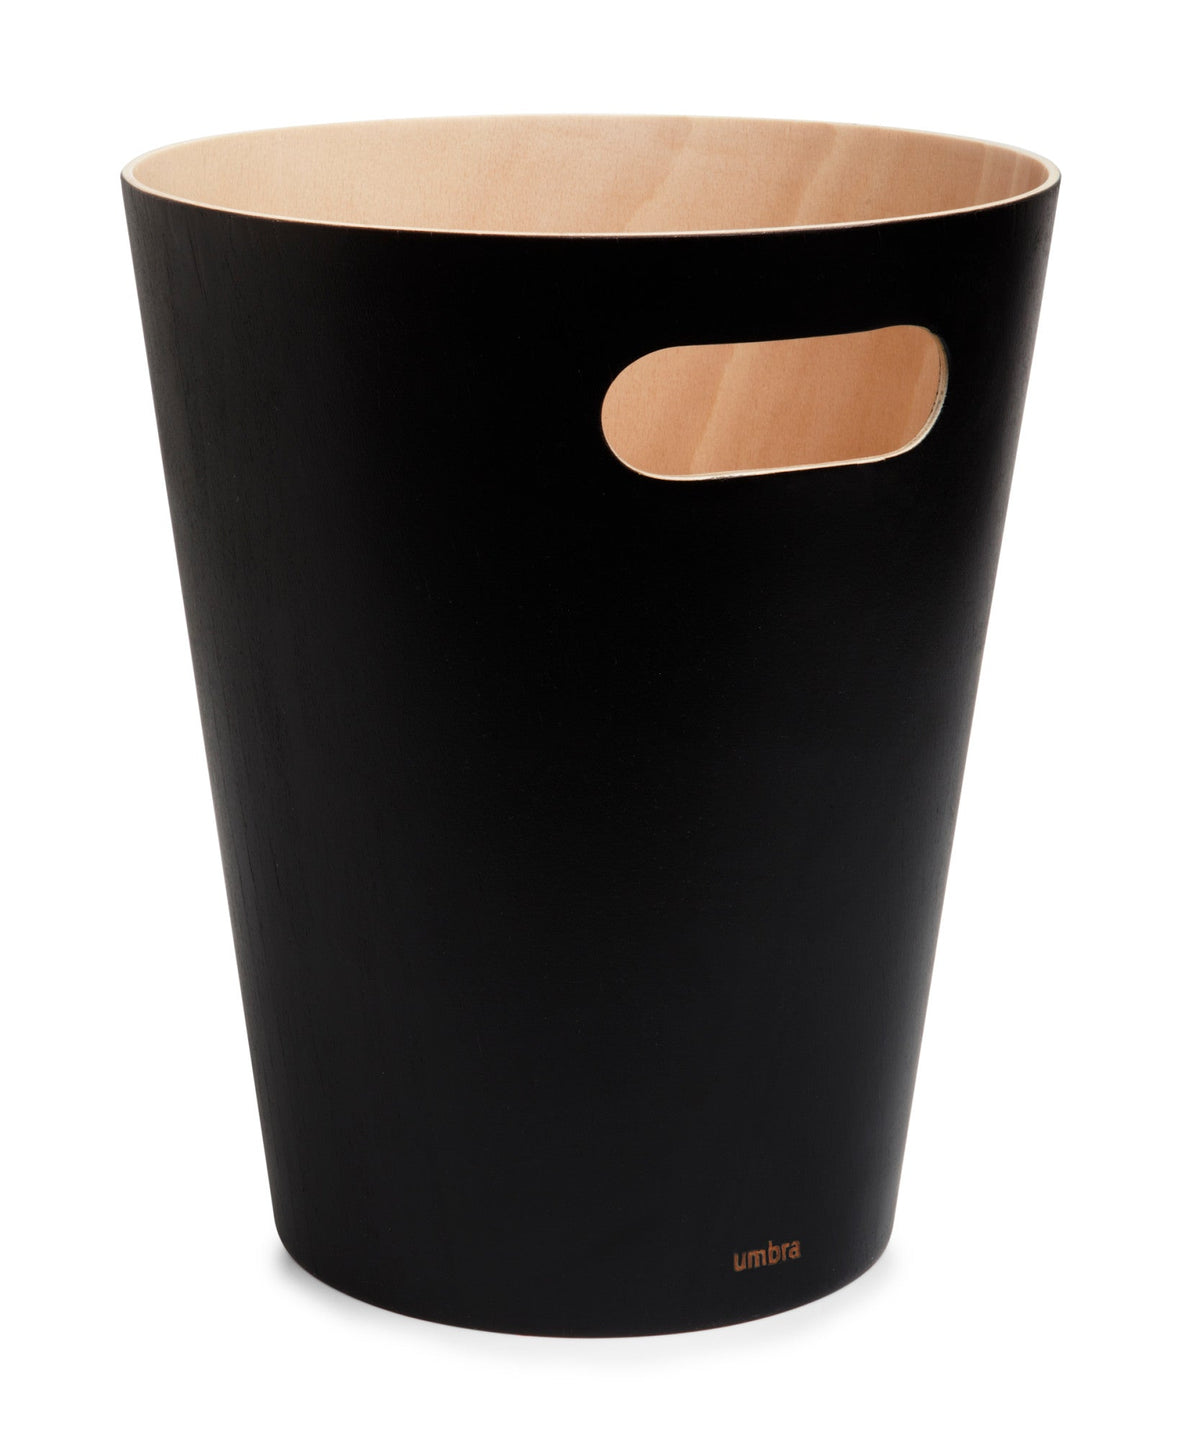 Umbra Woodrow Trash Can, Black with Natural Inside